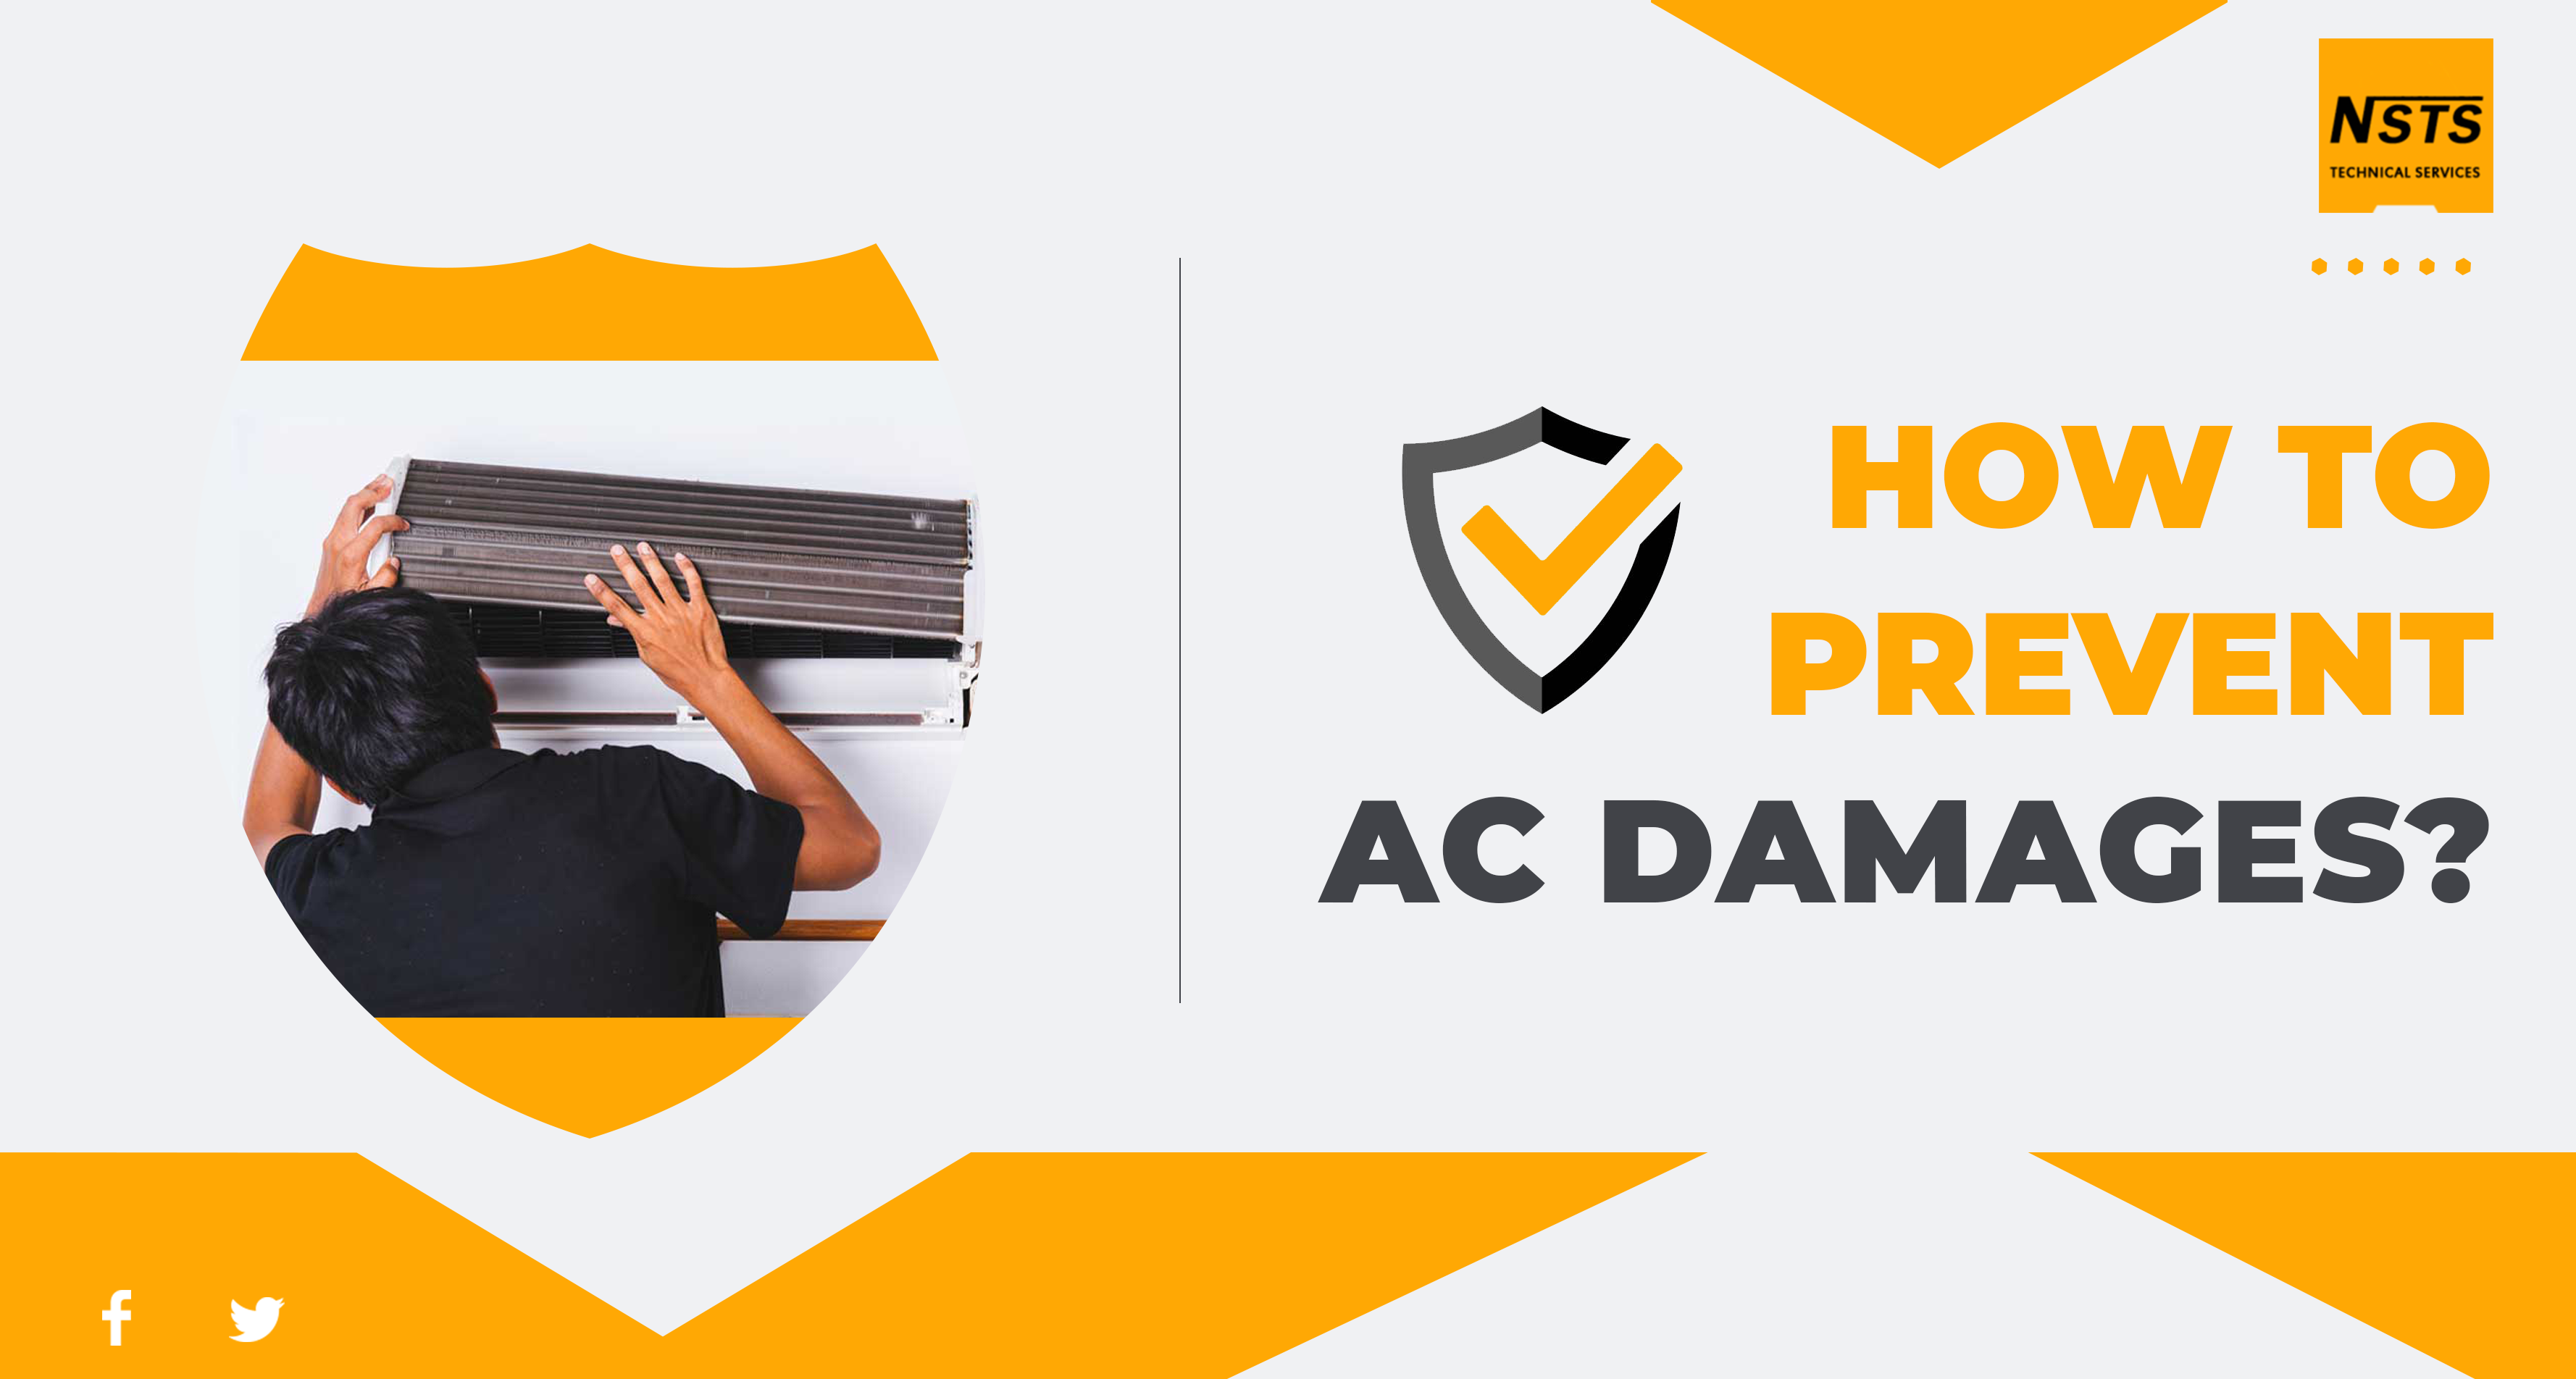 How to prevent AC damages